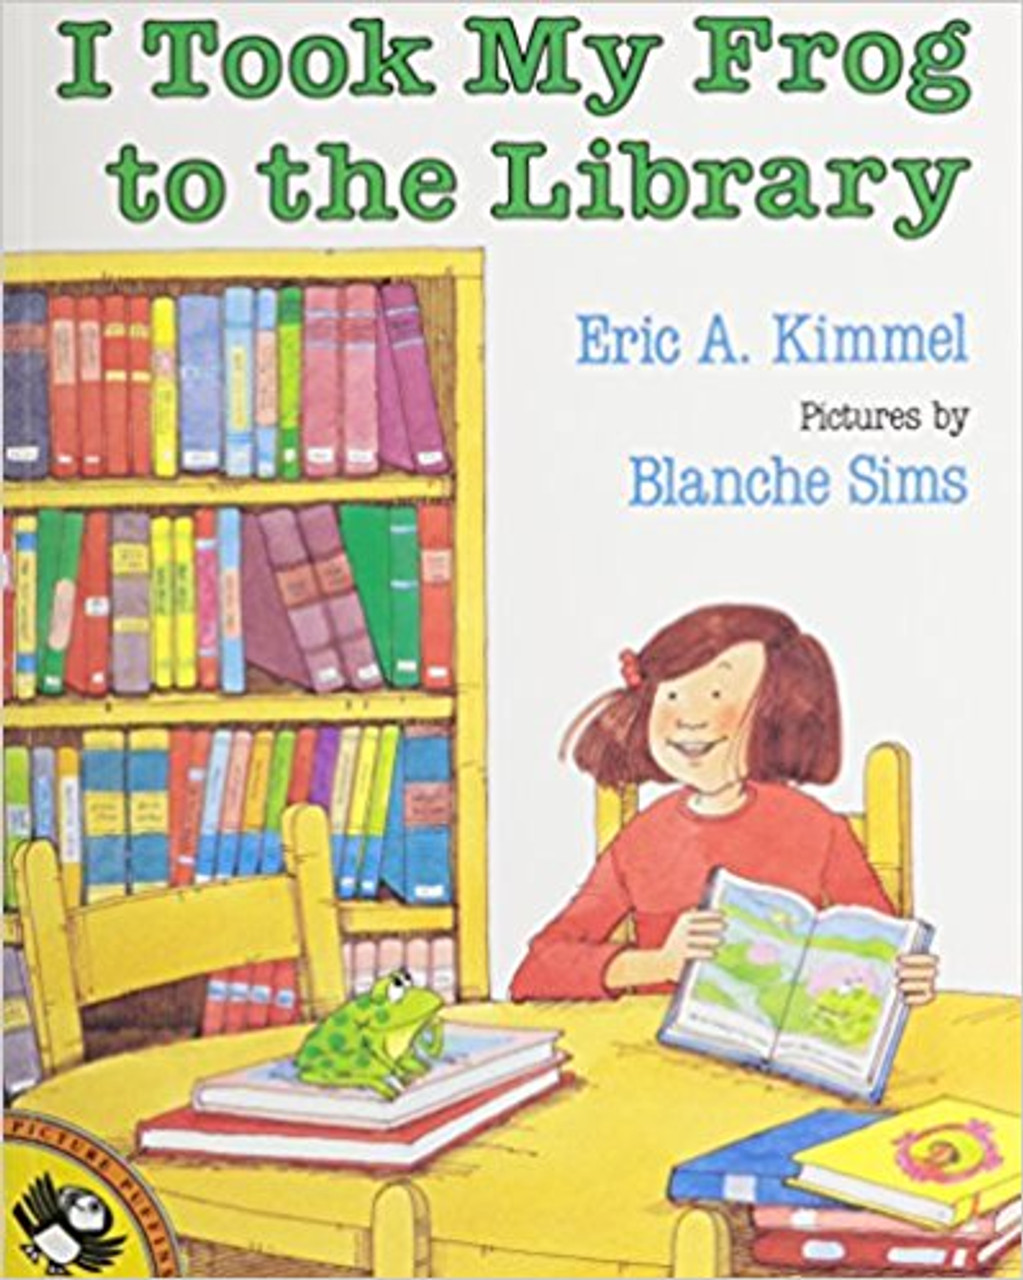 When Bridgett brings her pets to the library, the hyena laughs so loudly nobody can hear the story, the giraffe tries to read over everybody's shoulder, and the frog jumps onto the checkout desk, scaring the librarian. But it's the well-behaved elephant who causes the biggest problems of all! Full-color throughout.